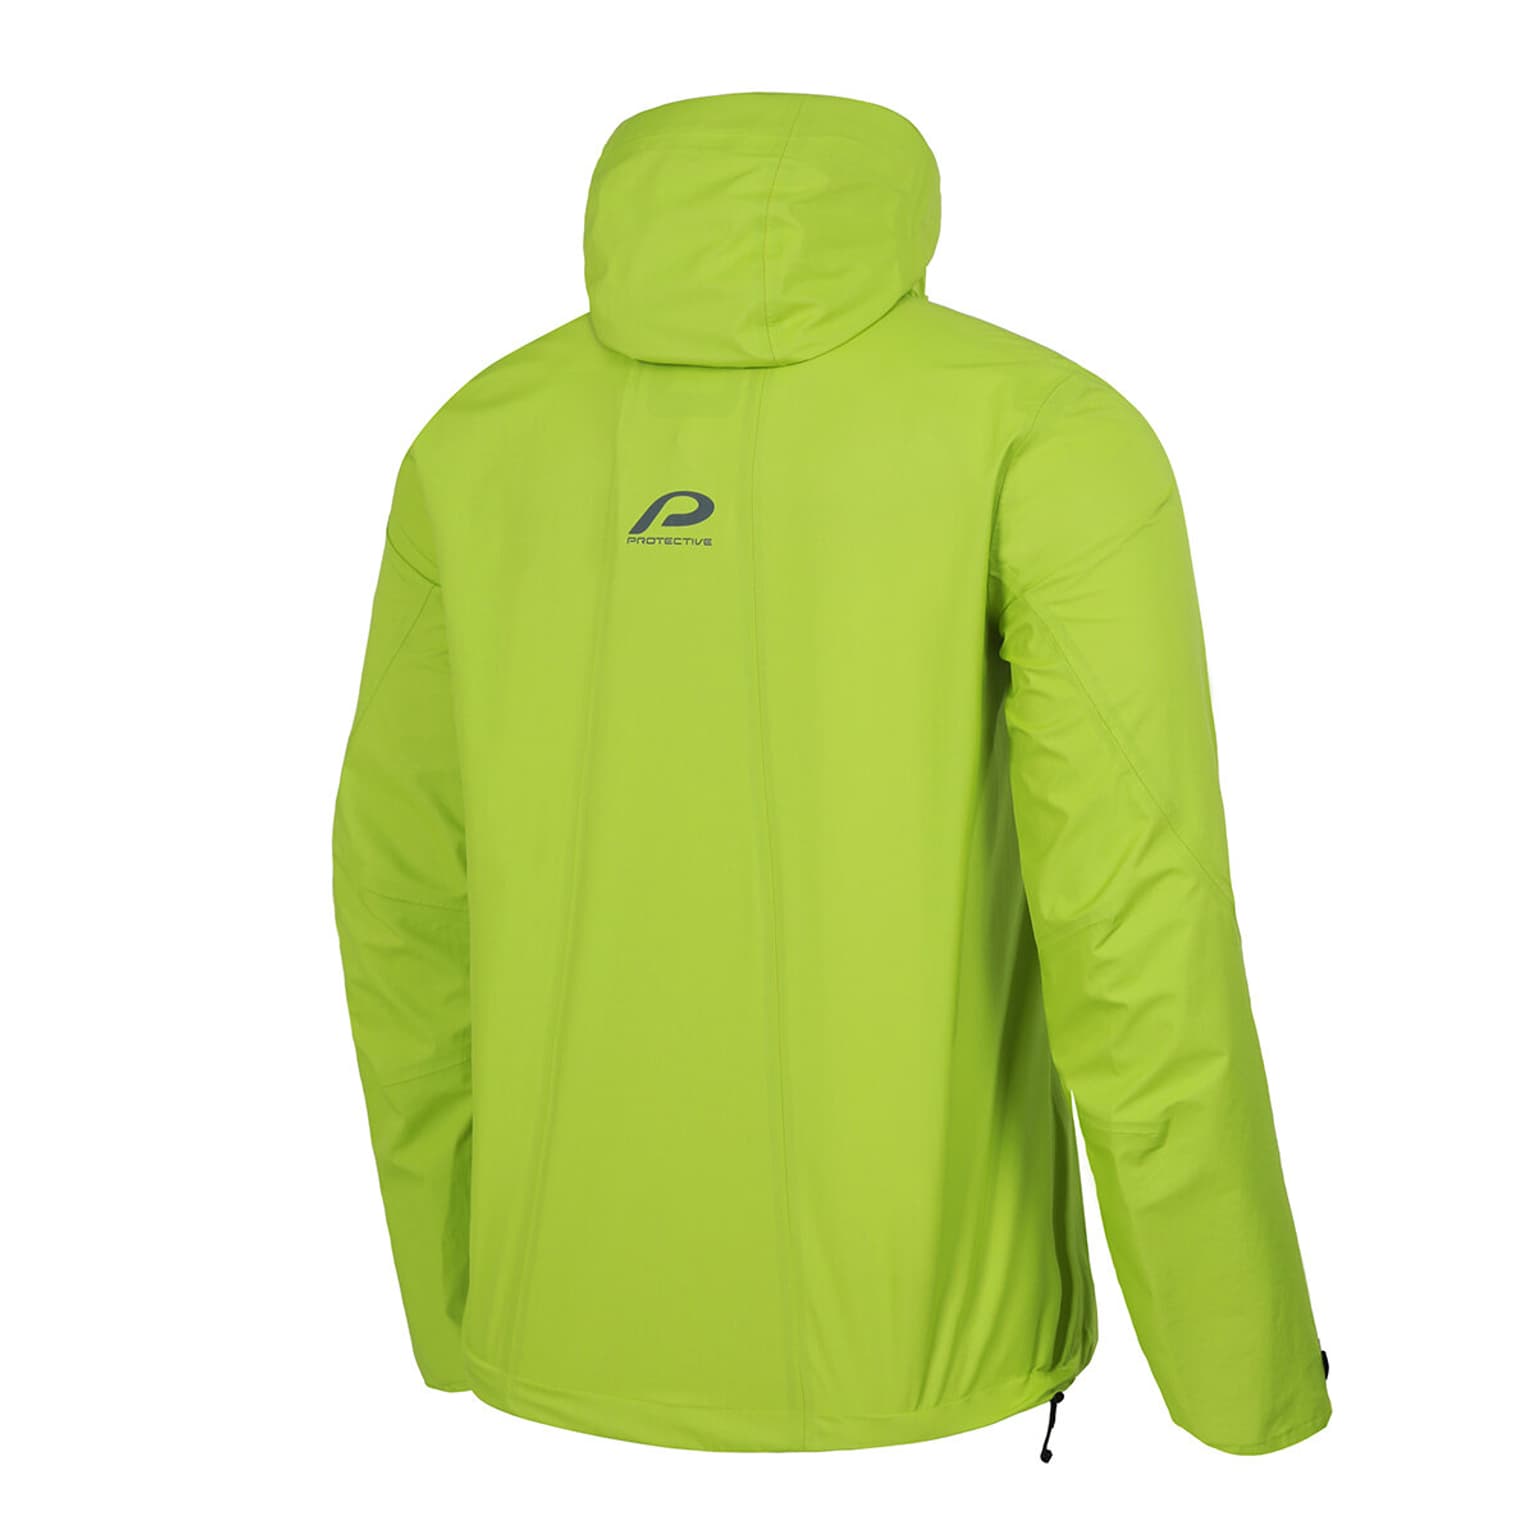 Protective Protective P- NEW AGE PRO Regenjacke lime 2